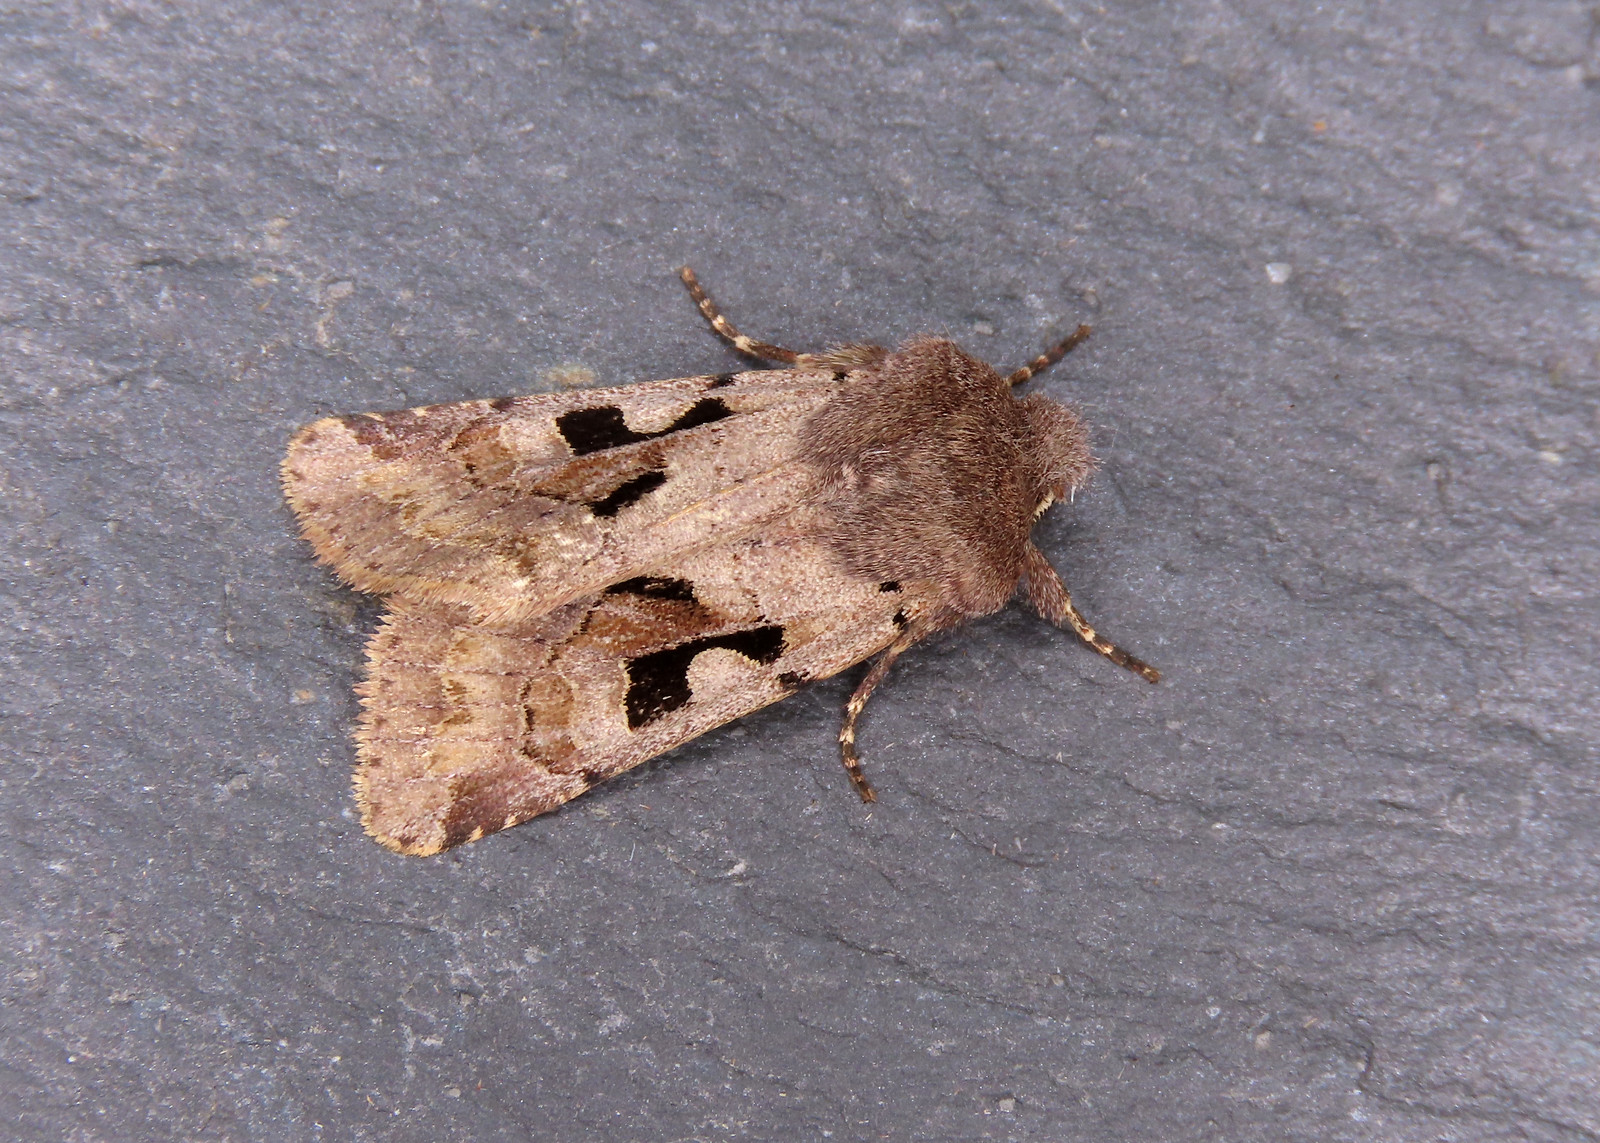 73.249 Hebrew Character - Orthosia gothica